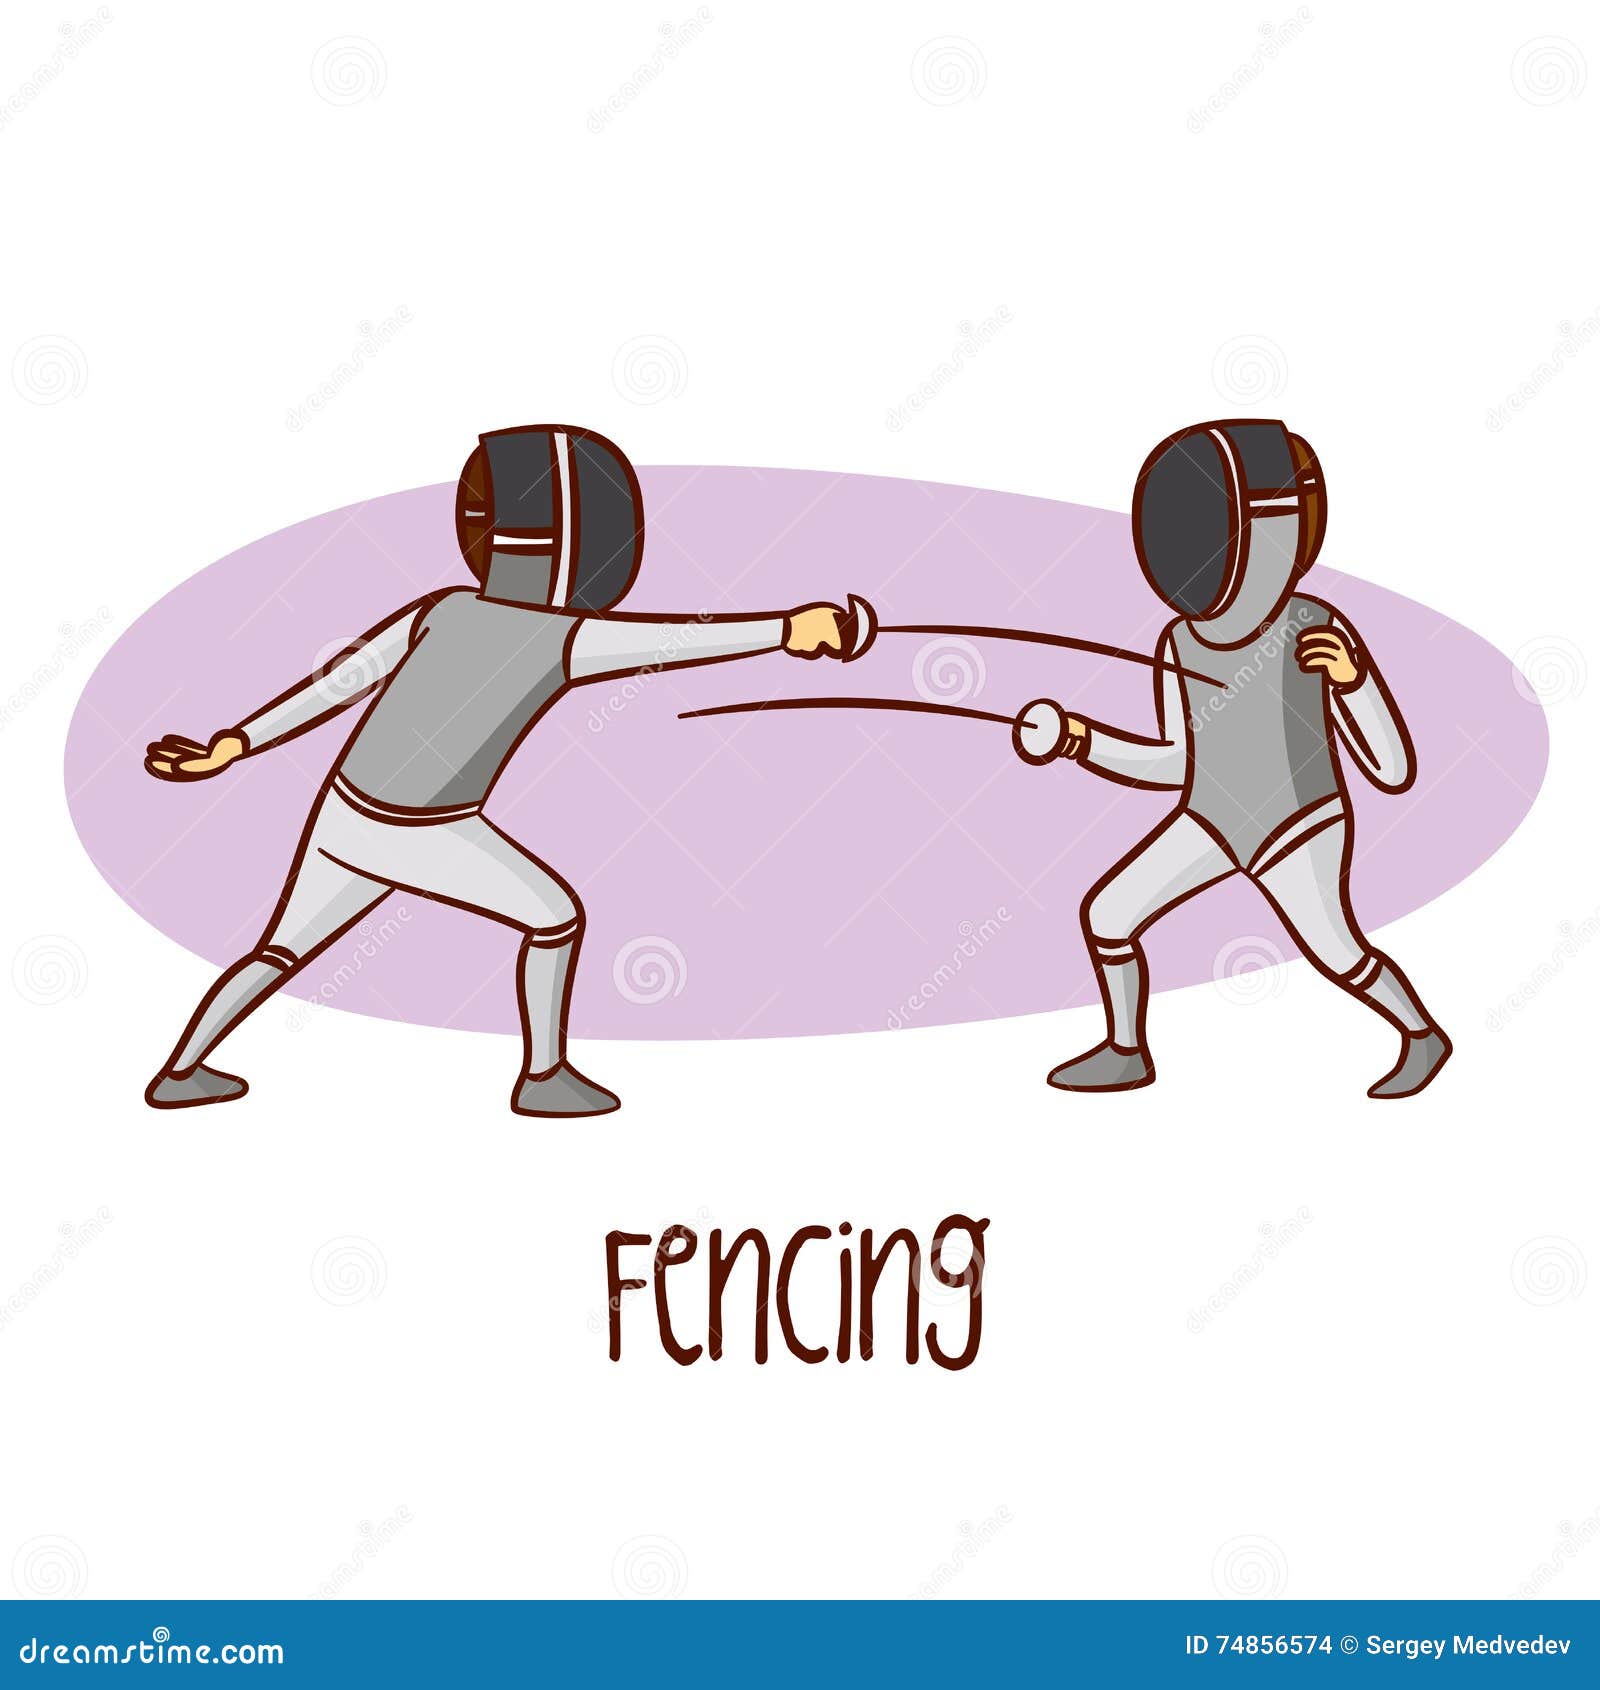 summer olympic sports. fencing